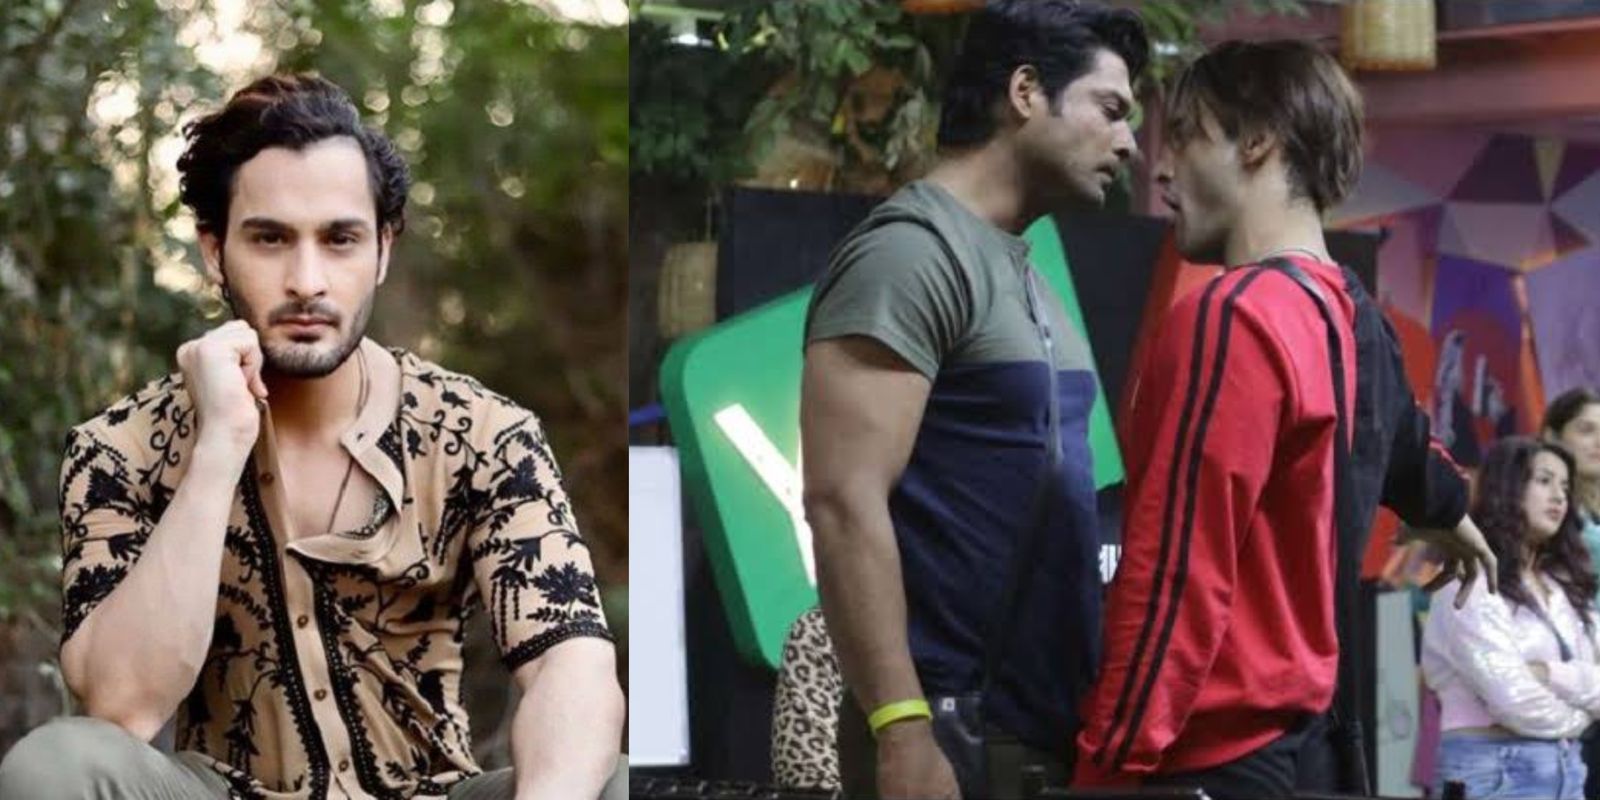 EXCLUSIVE: Bigg Boss 13: Siddharth Shukla Knows He Is Finished And People Are Just Talking About Asim Riaz, Claims Brother Umar